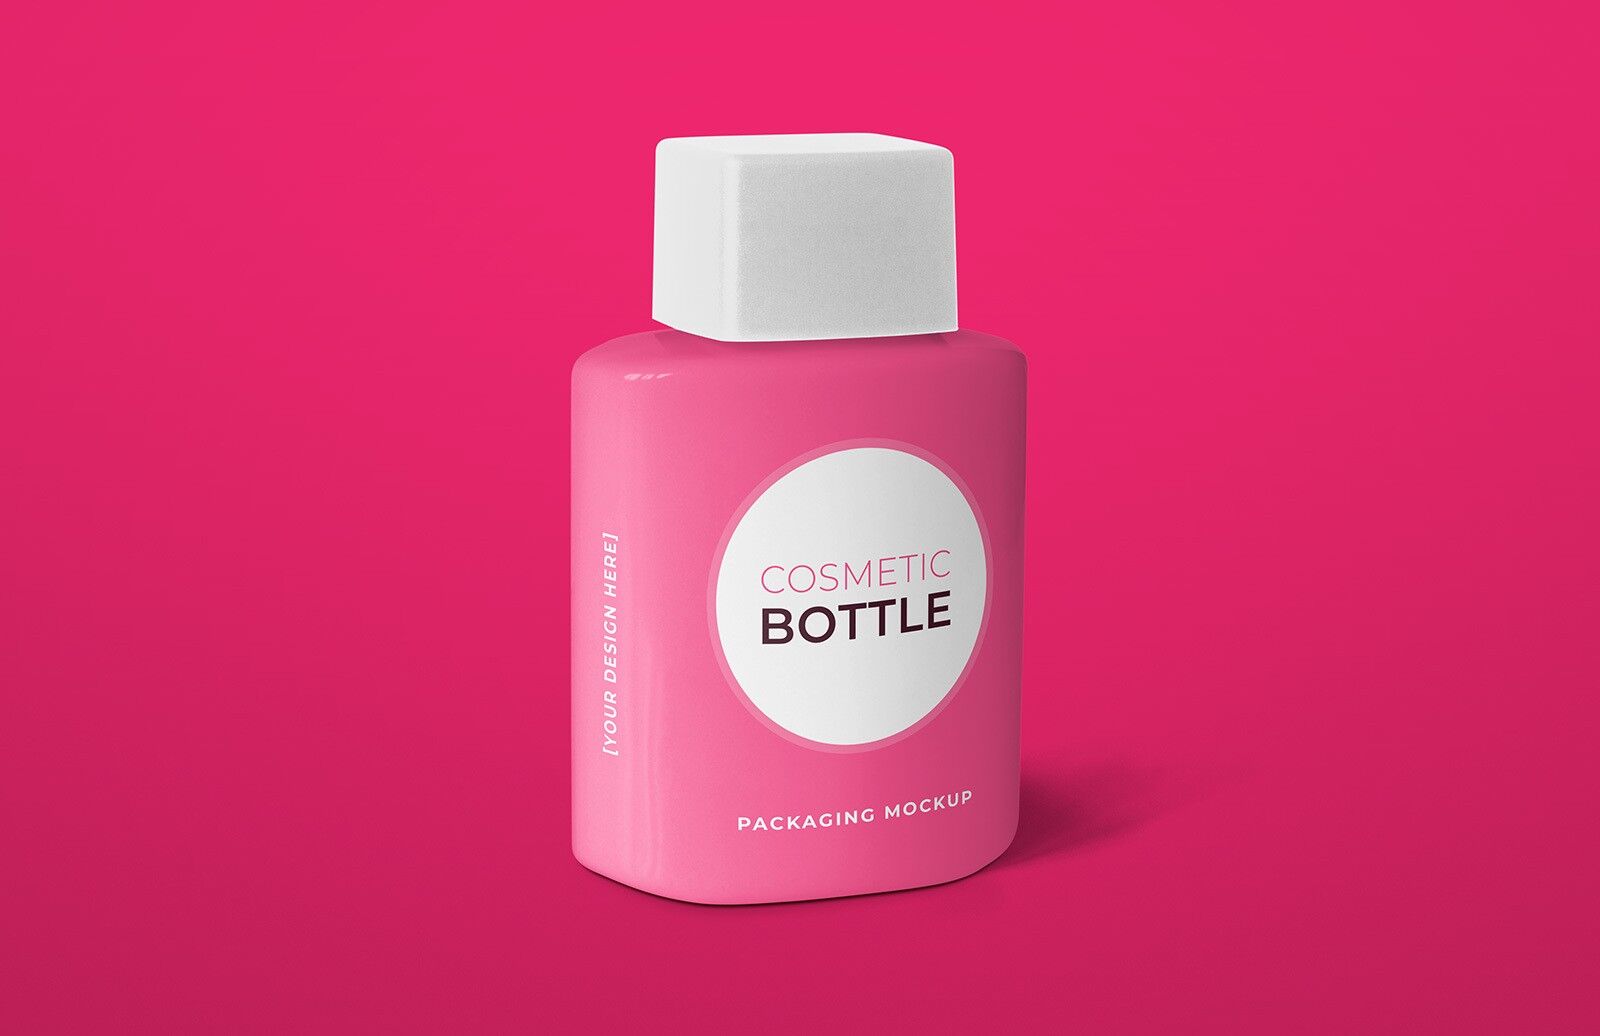 Mockup of a Medium sized Cosmetic Bottle Packaging FREE PSD